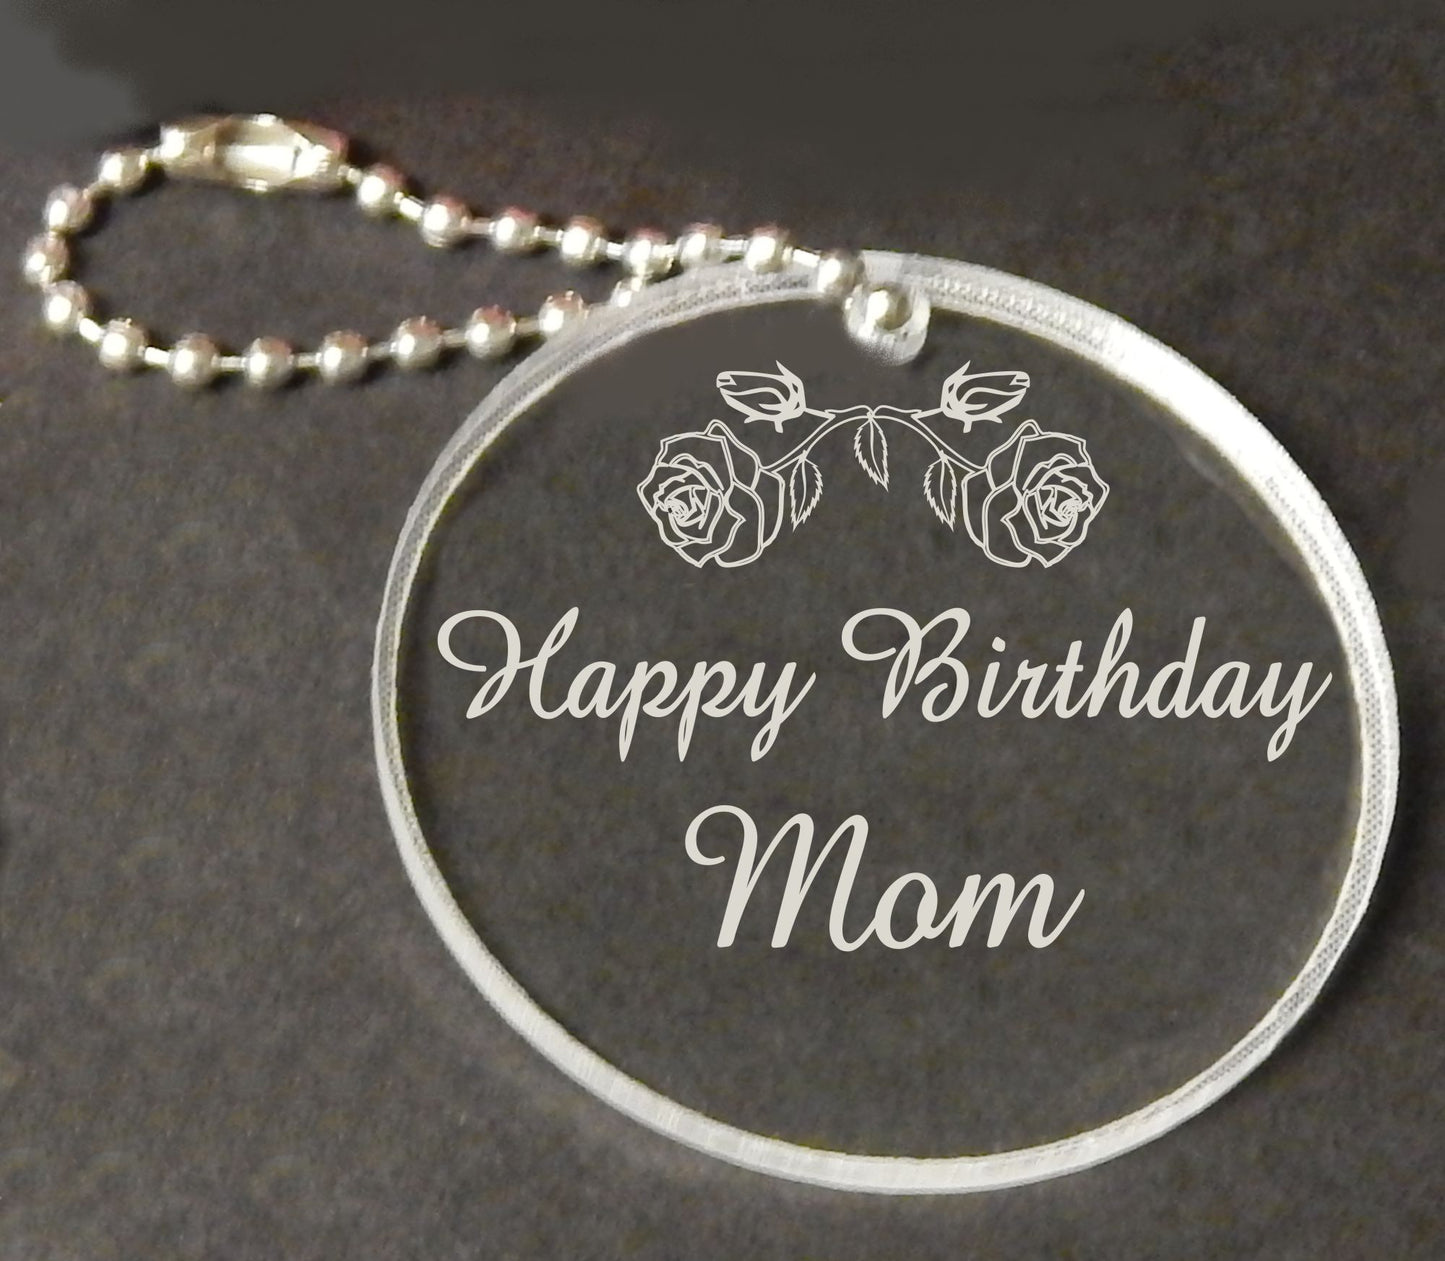 acrylic round keychain favor engraved with a rose design and attached to a small chain